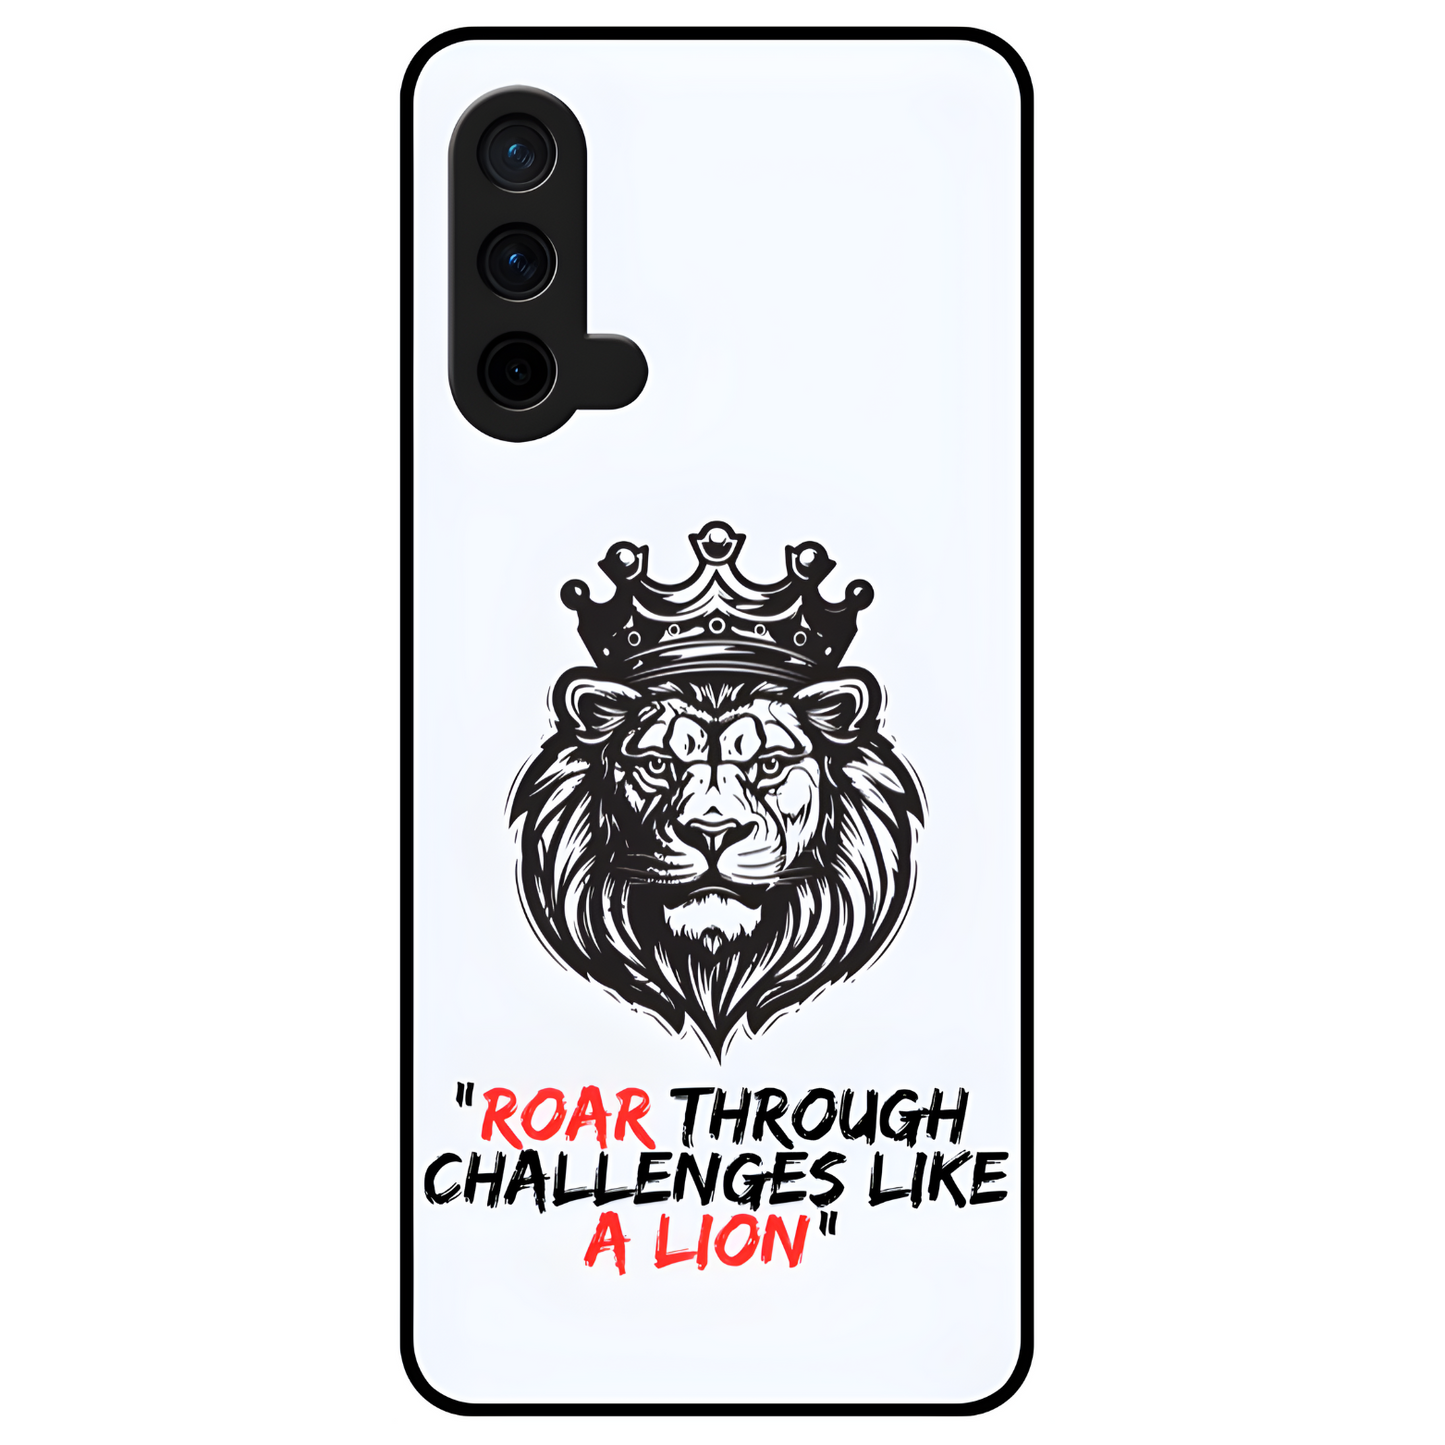 One Plus Nord CE 5G - Roar Through Challanges Like A Lion